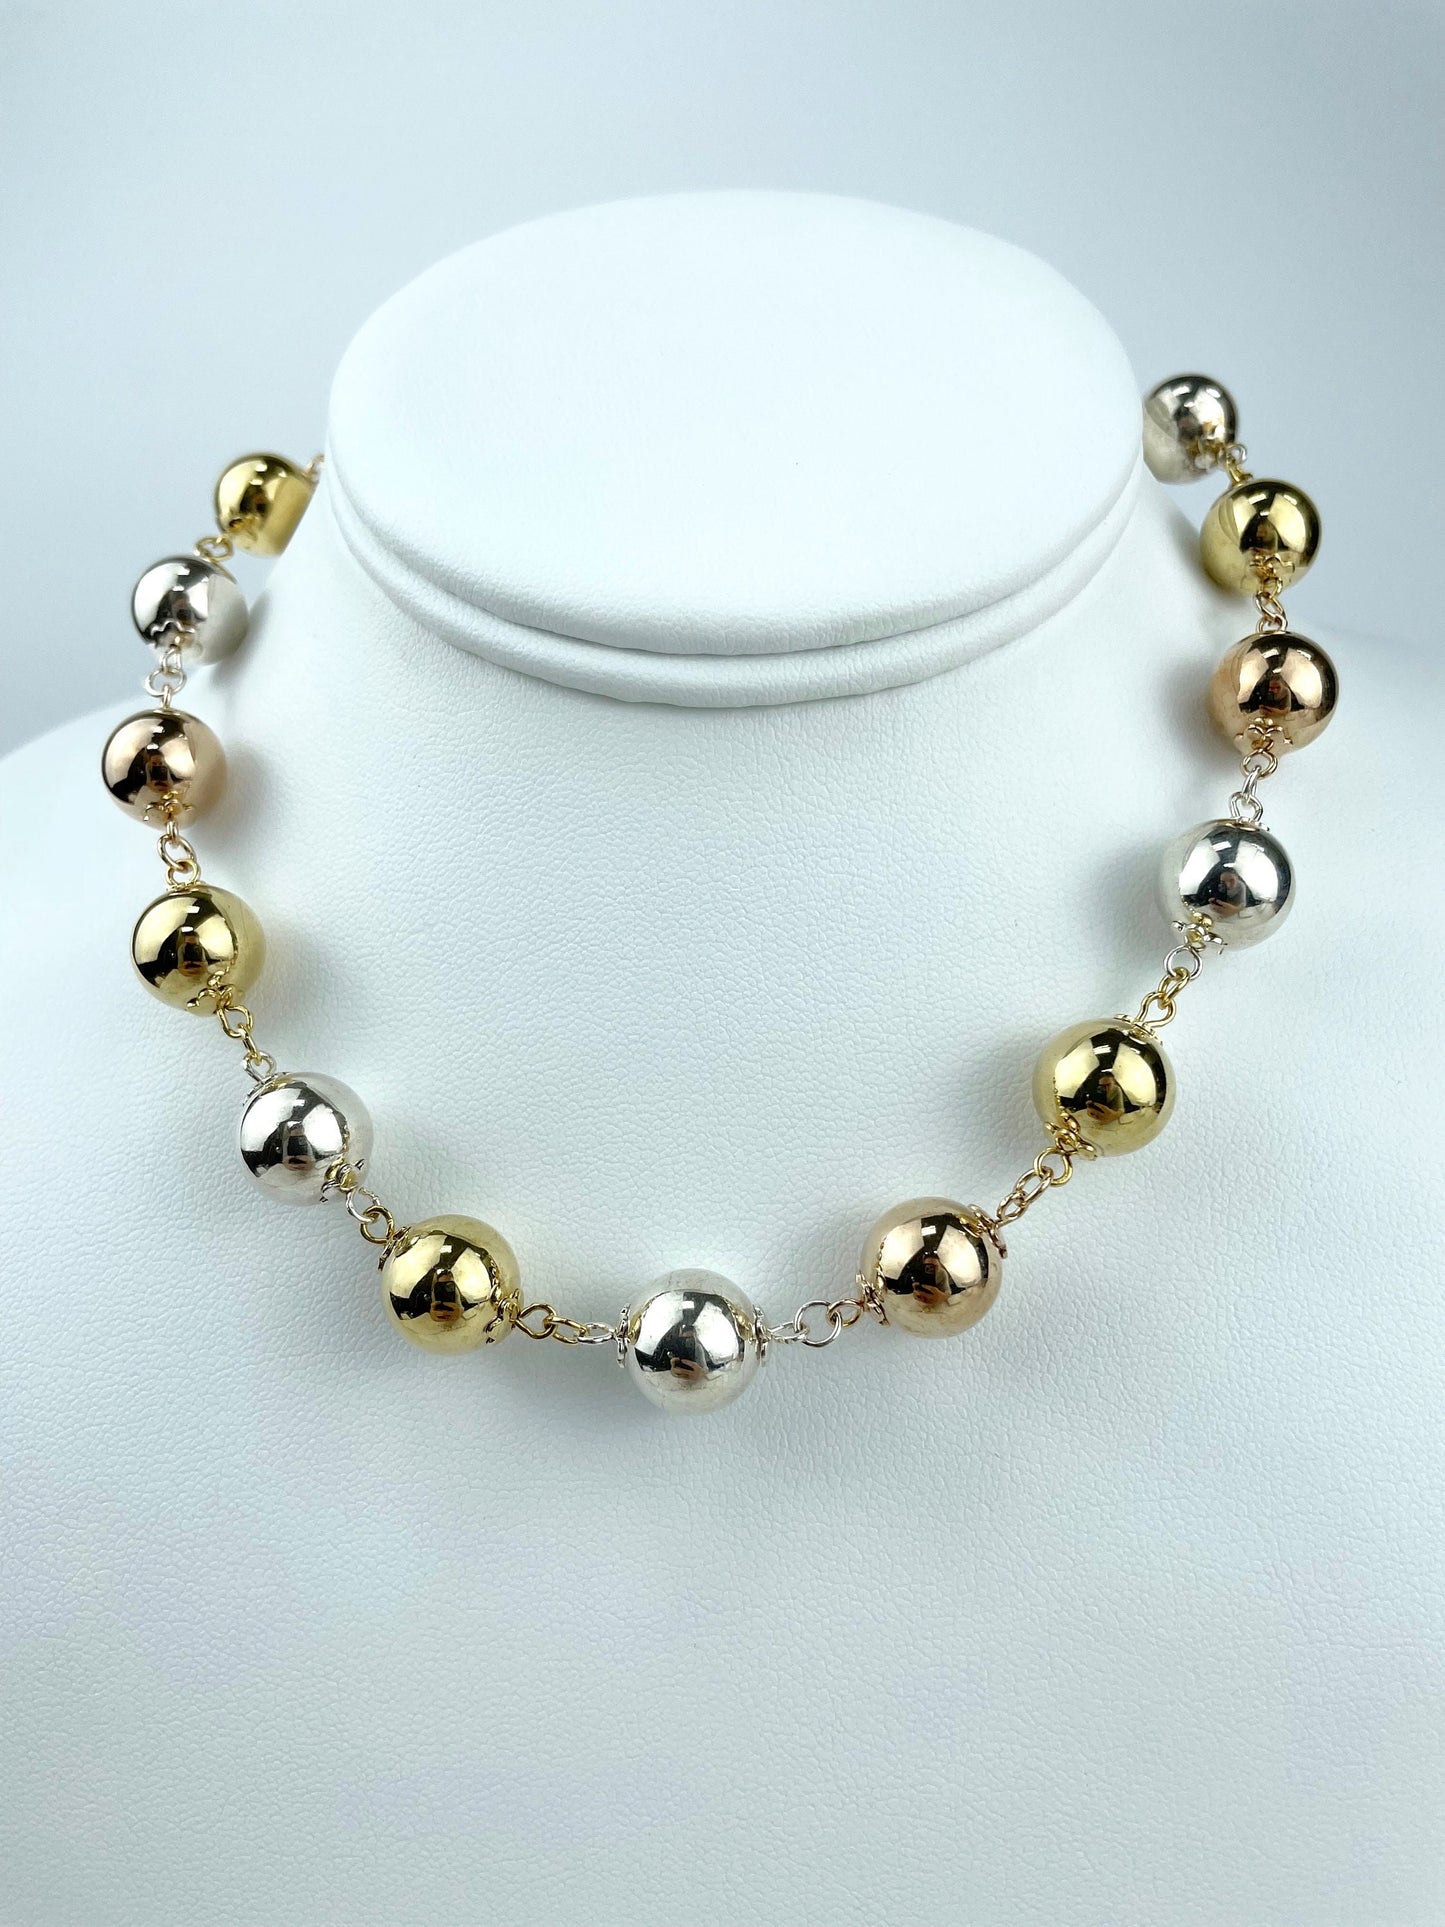 18k Gold Filled Three Tone Ball Choker, Gold, Silver & Rose Gold, Wholesale Jewelry Making Supplies